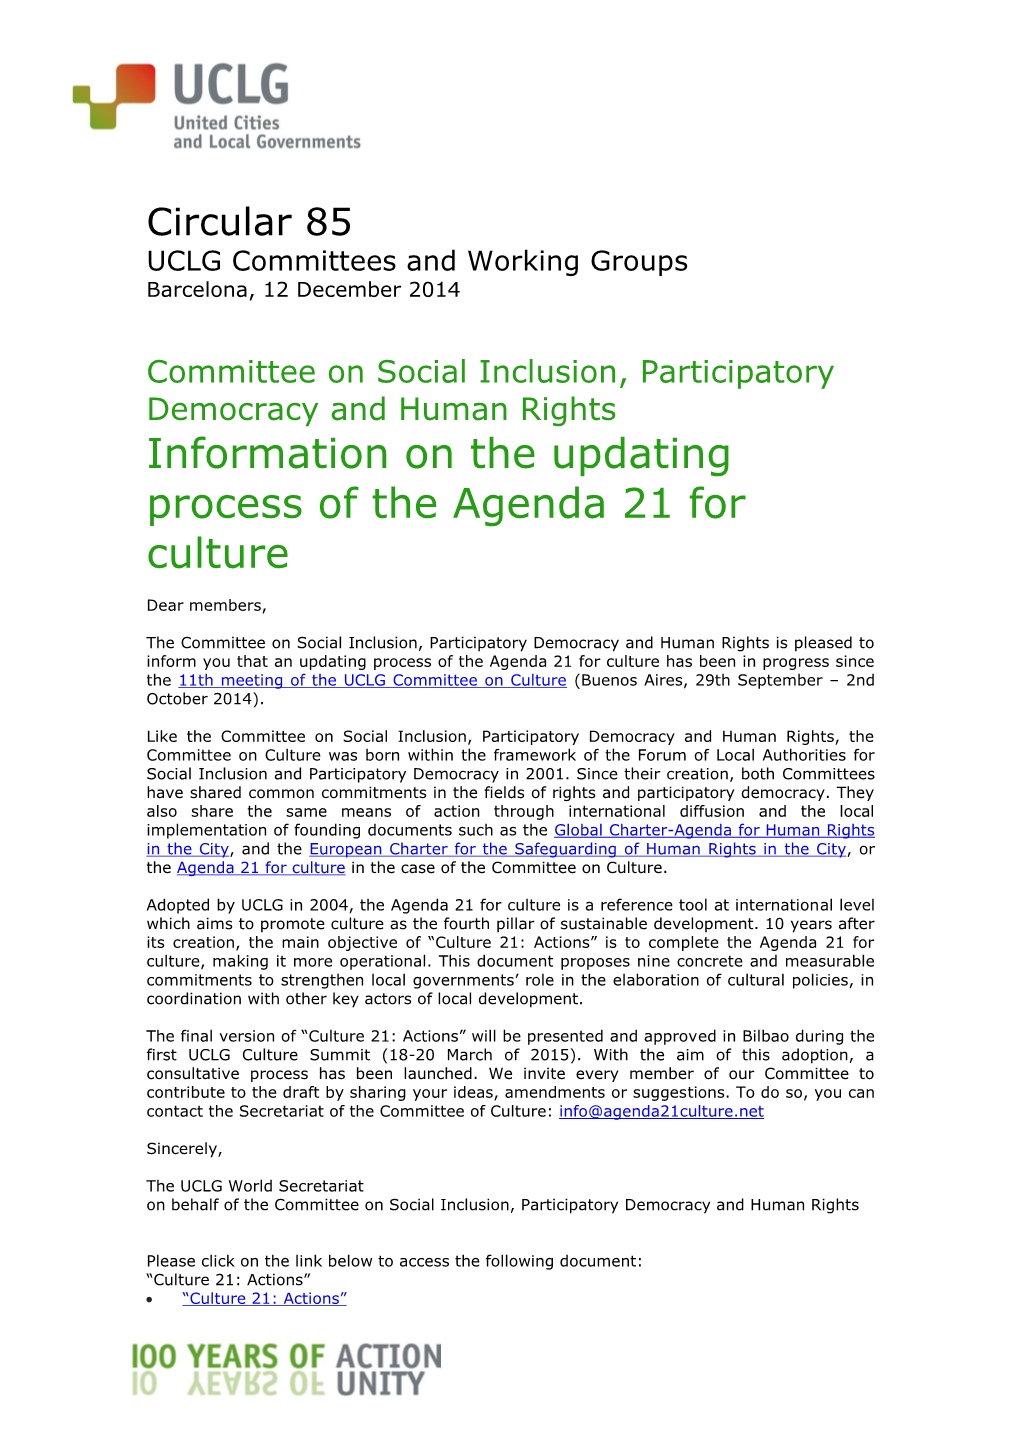 Information on the Updating Process of the Agenda 21 for Culture